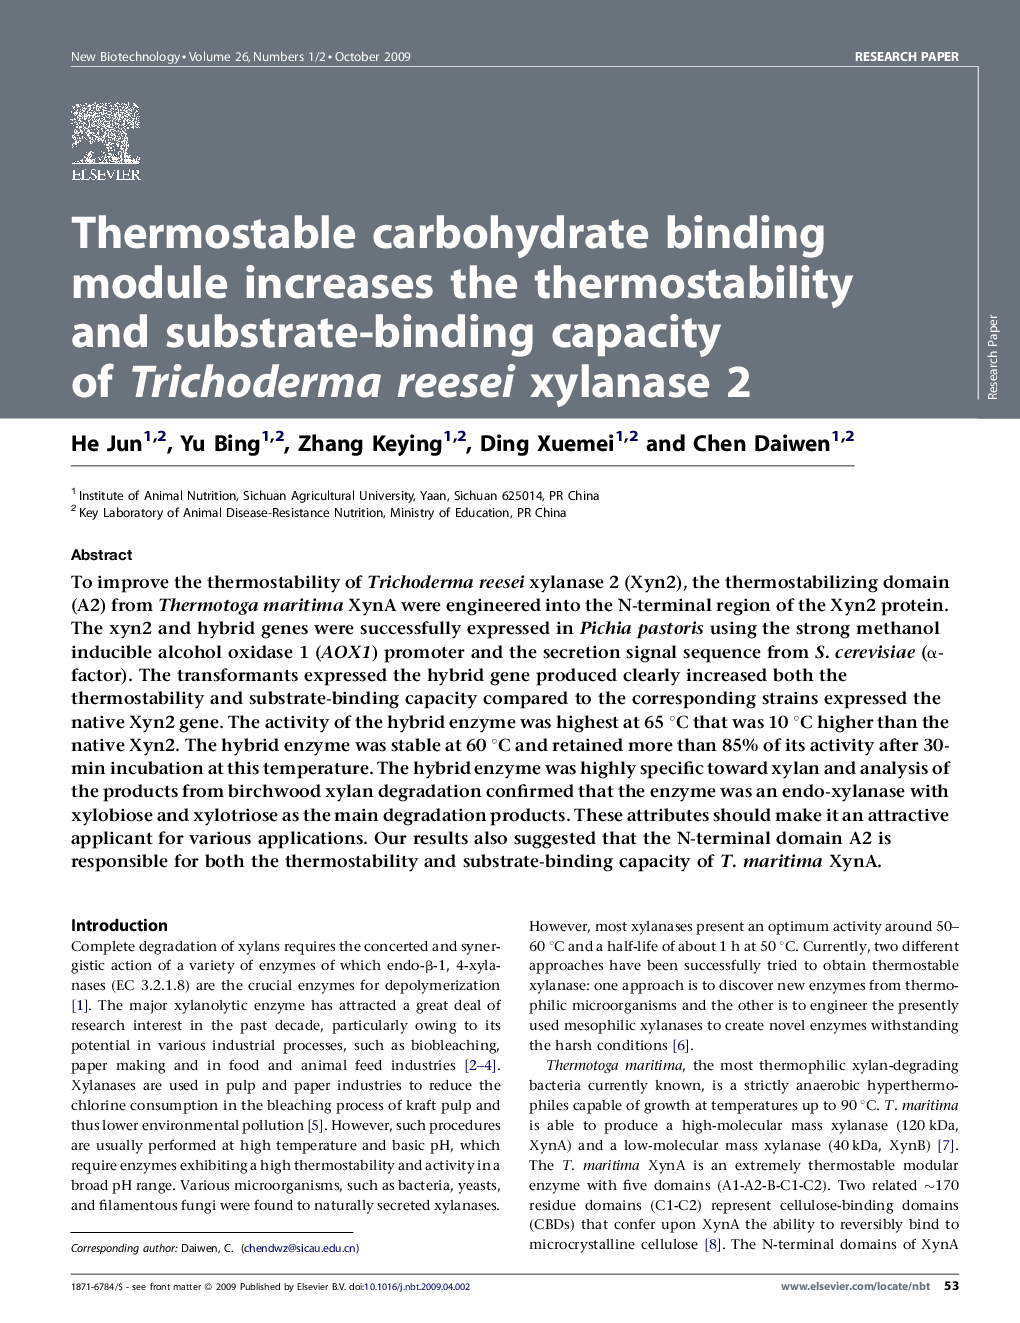 Thermostable carbohydrate binding module increases the thermostability and substrate-binding capacity of Trichoderma reesei xylanase 2